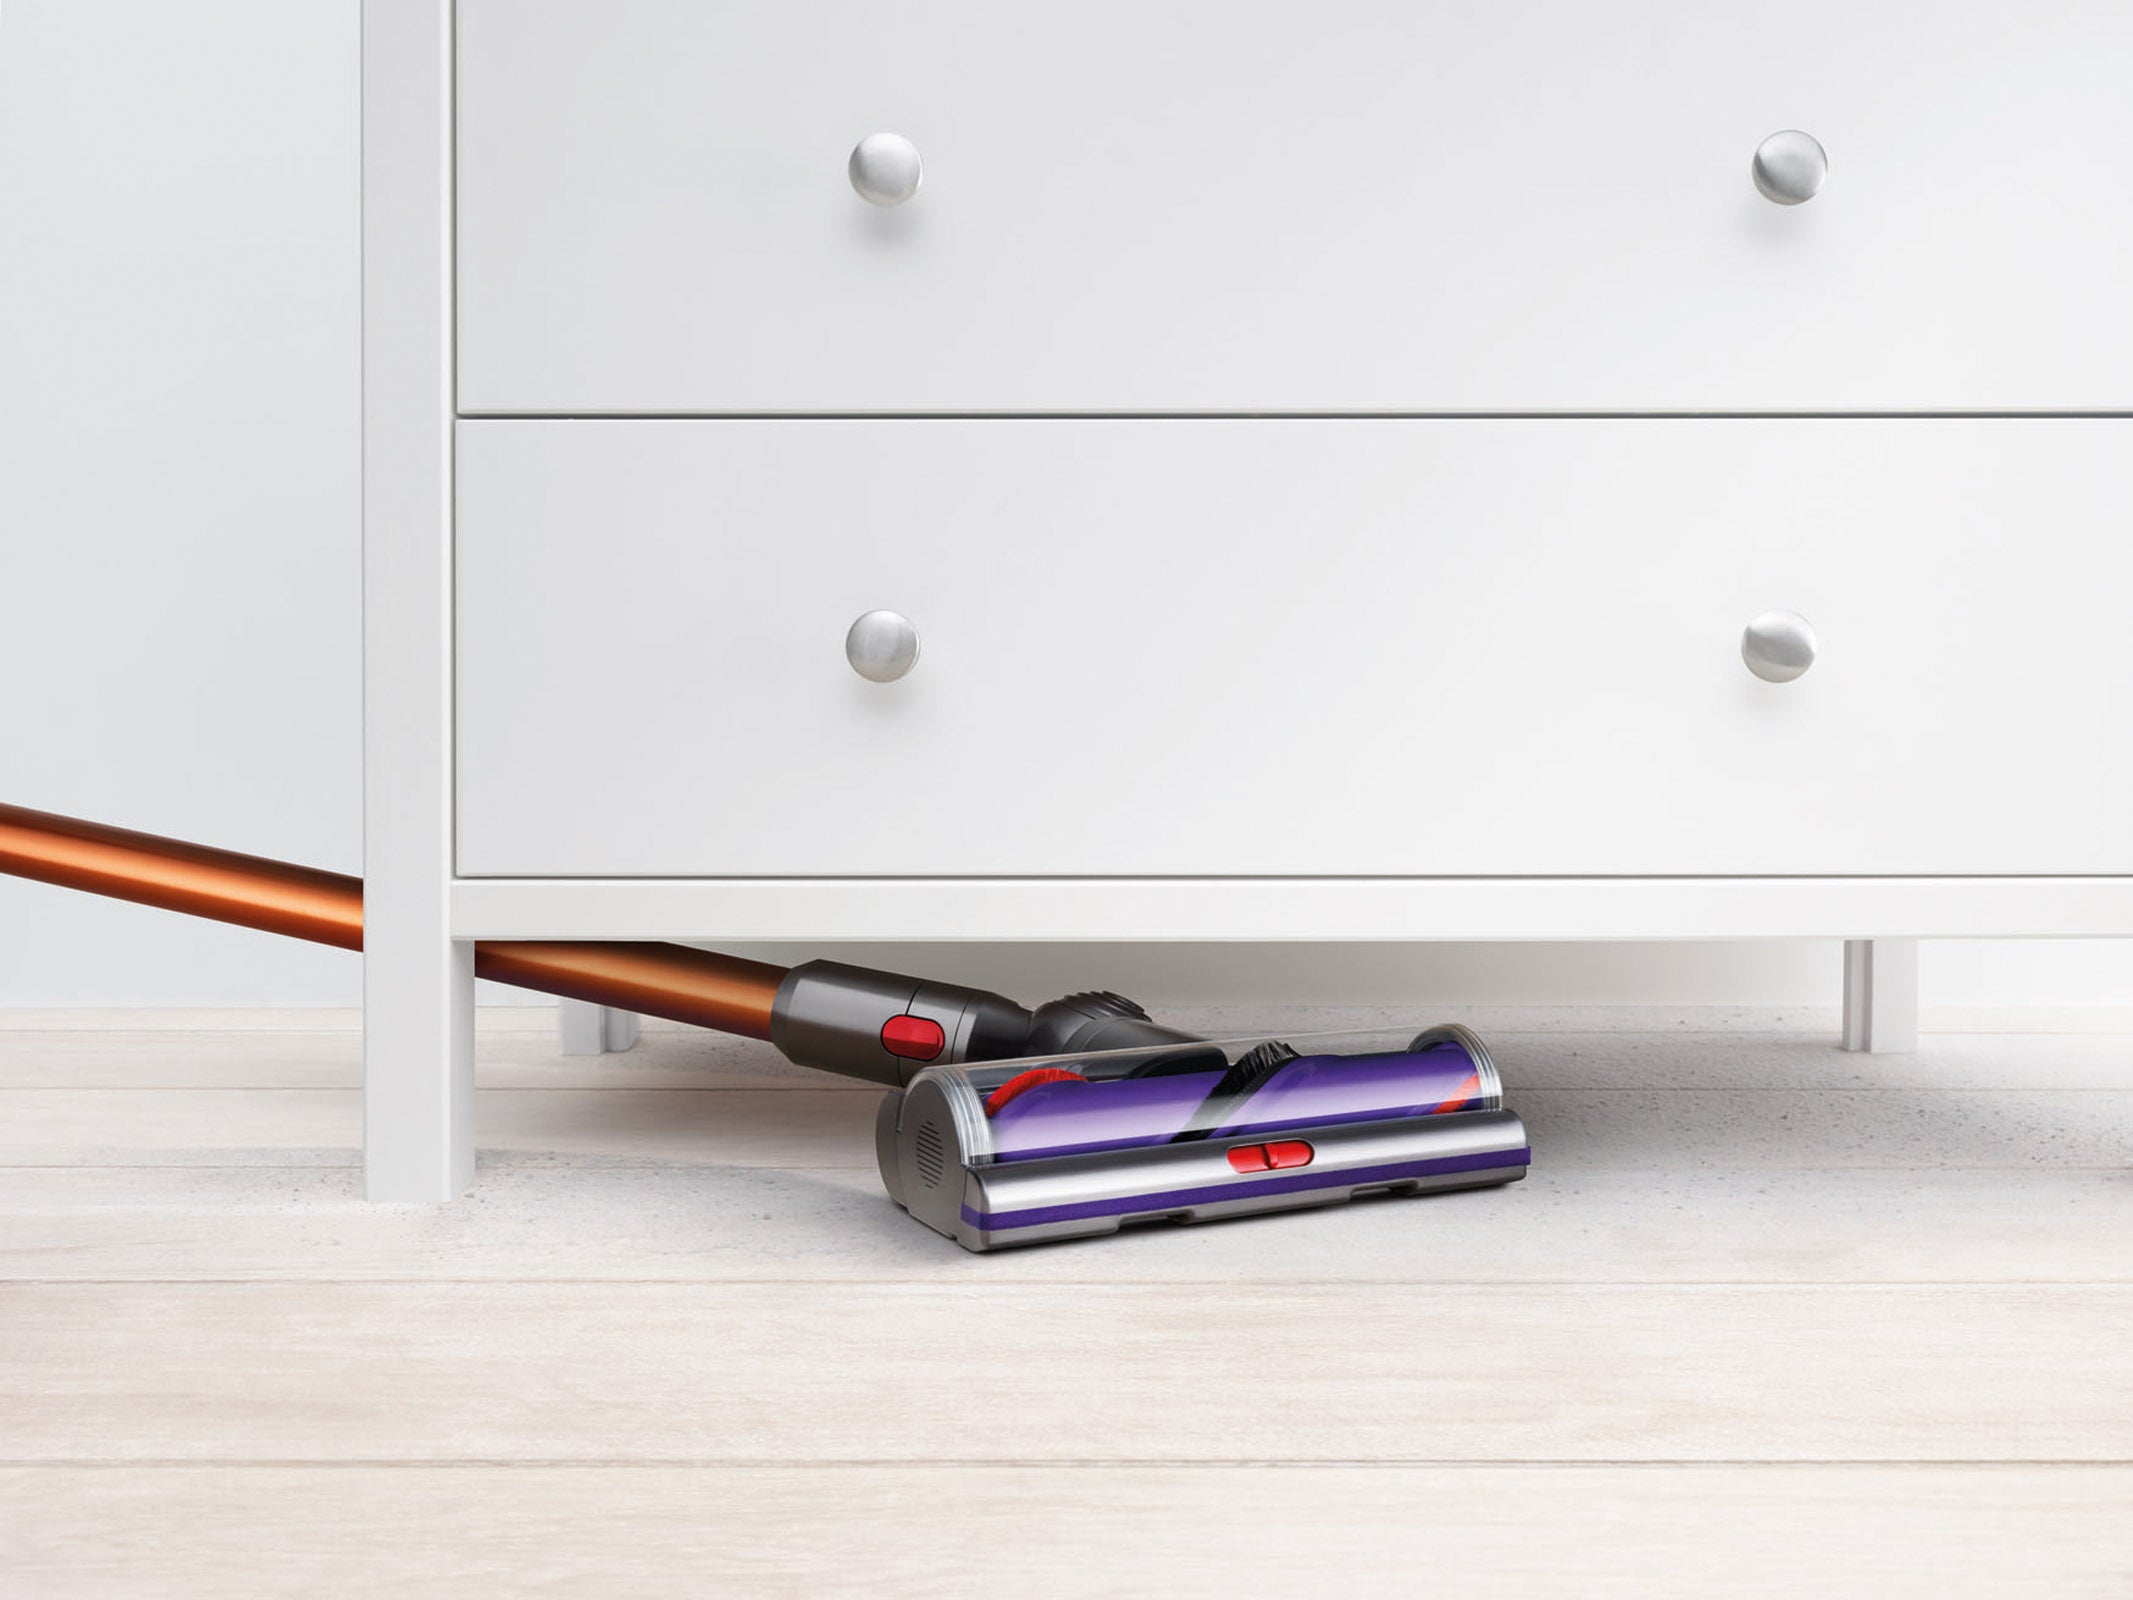 Dyson Cyclone V10 Absolute vacuum cleaning under a dresser.